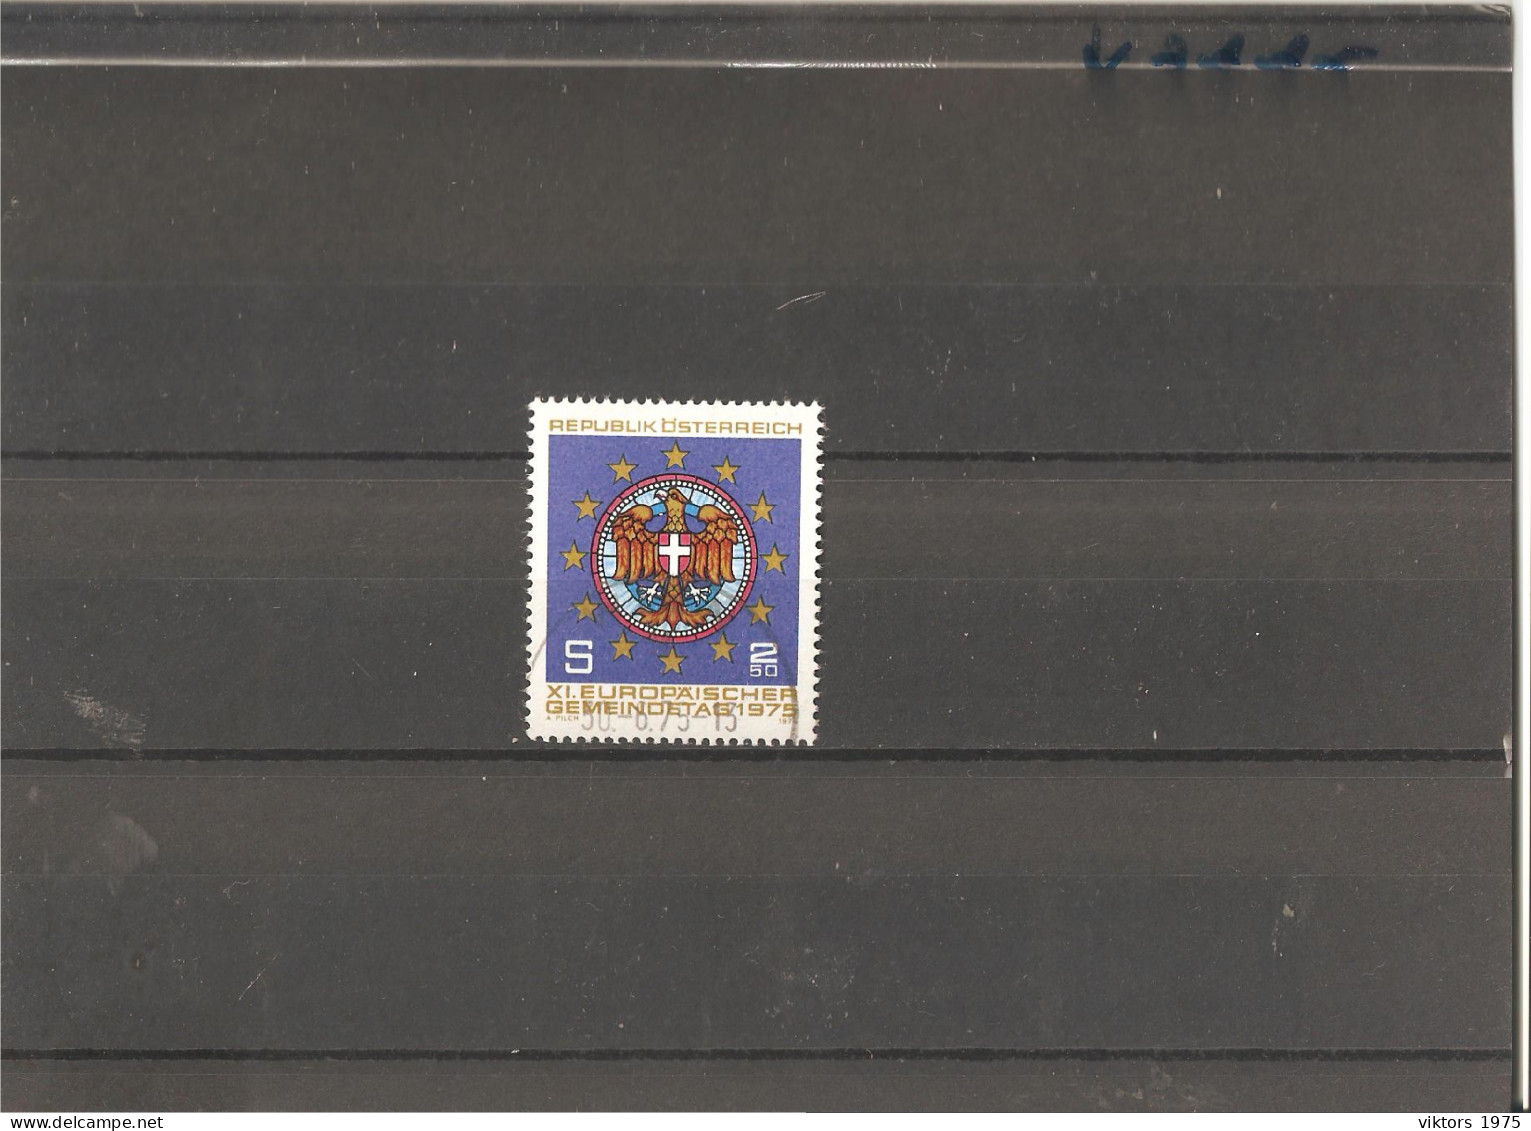 Used Stamp Nr.1484 In MICHEL Catalog - Used Stamps